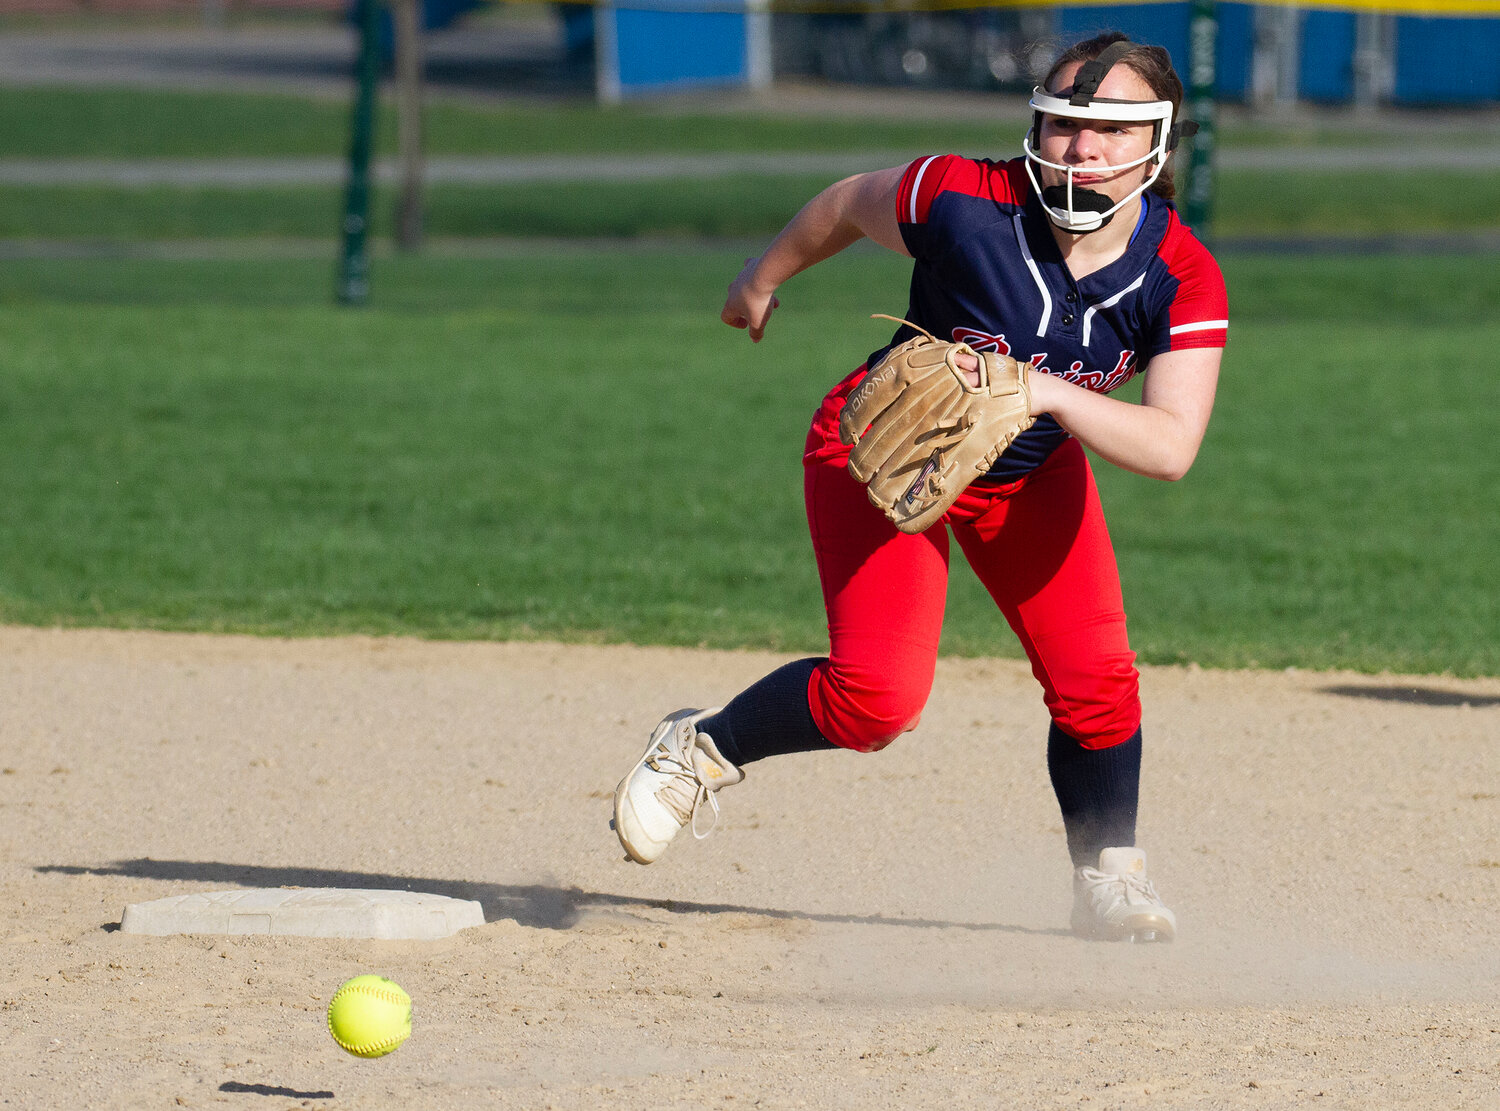 Second baseman Maggie Lauder rushes a slow-rolling grounder.